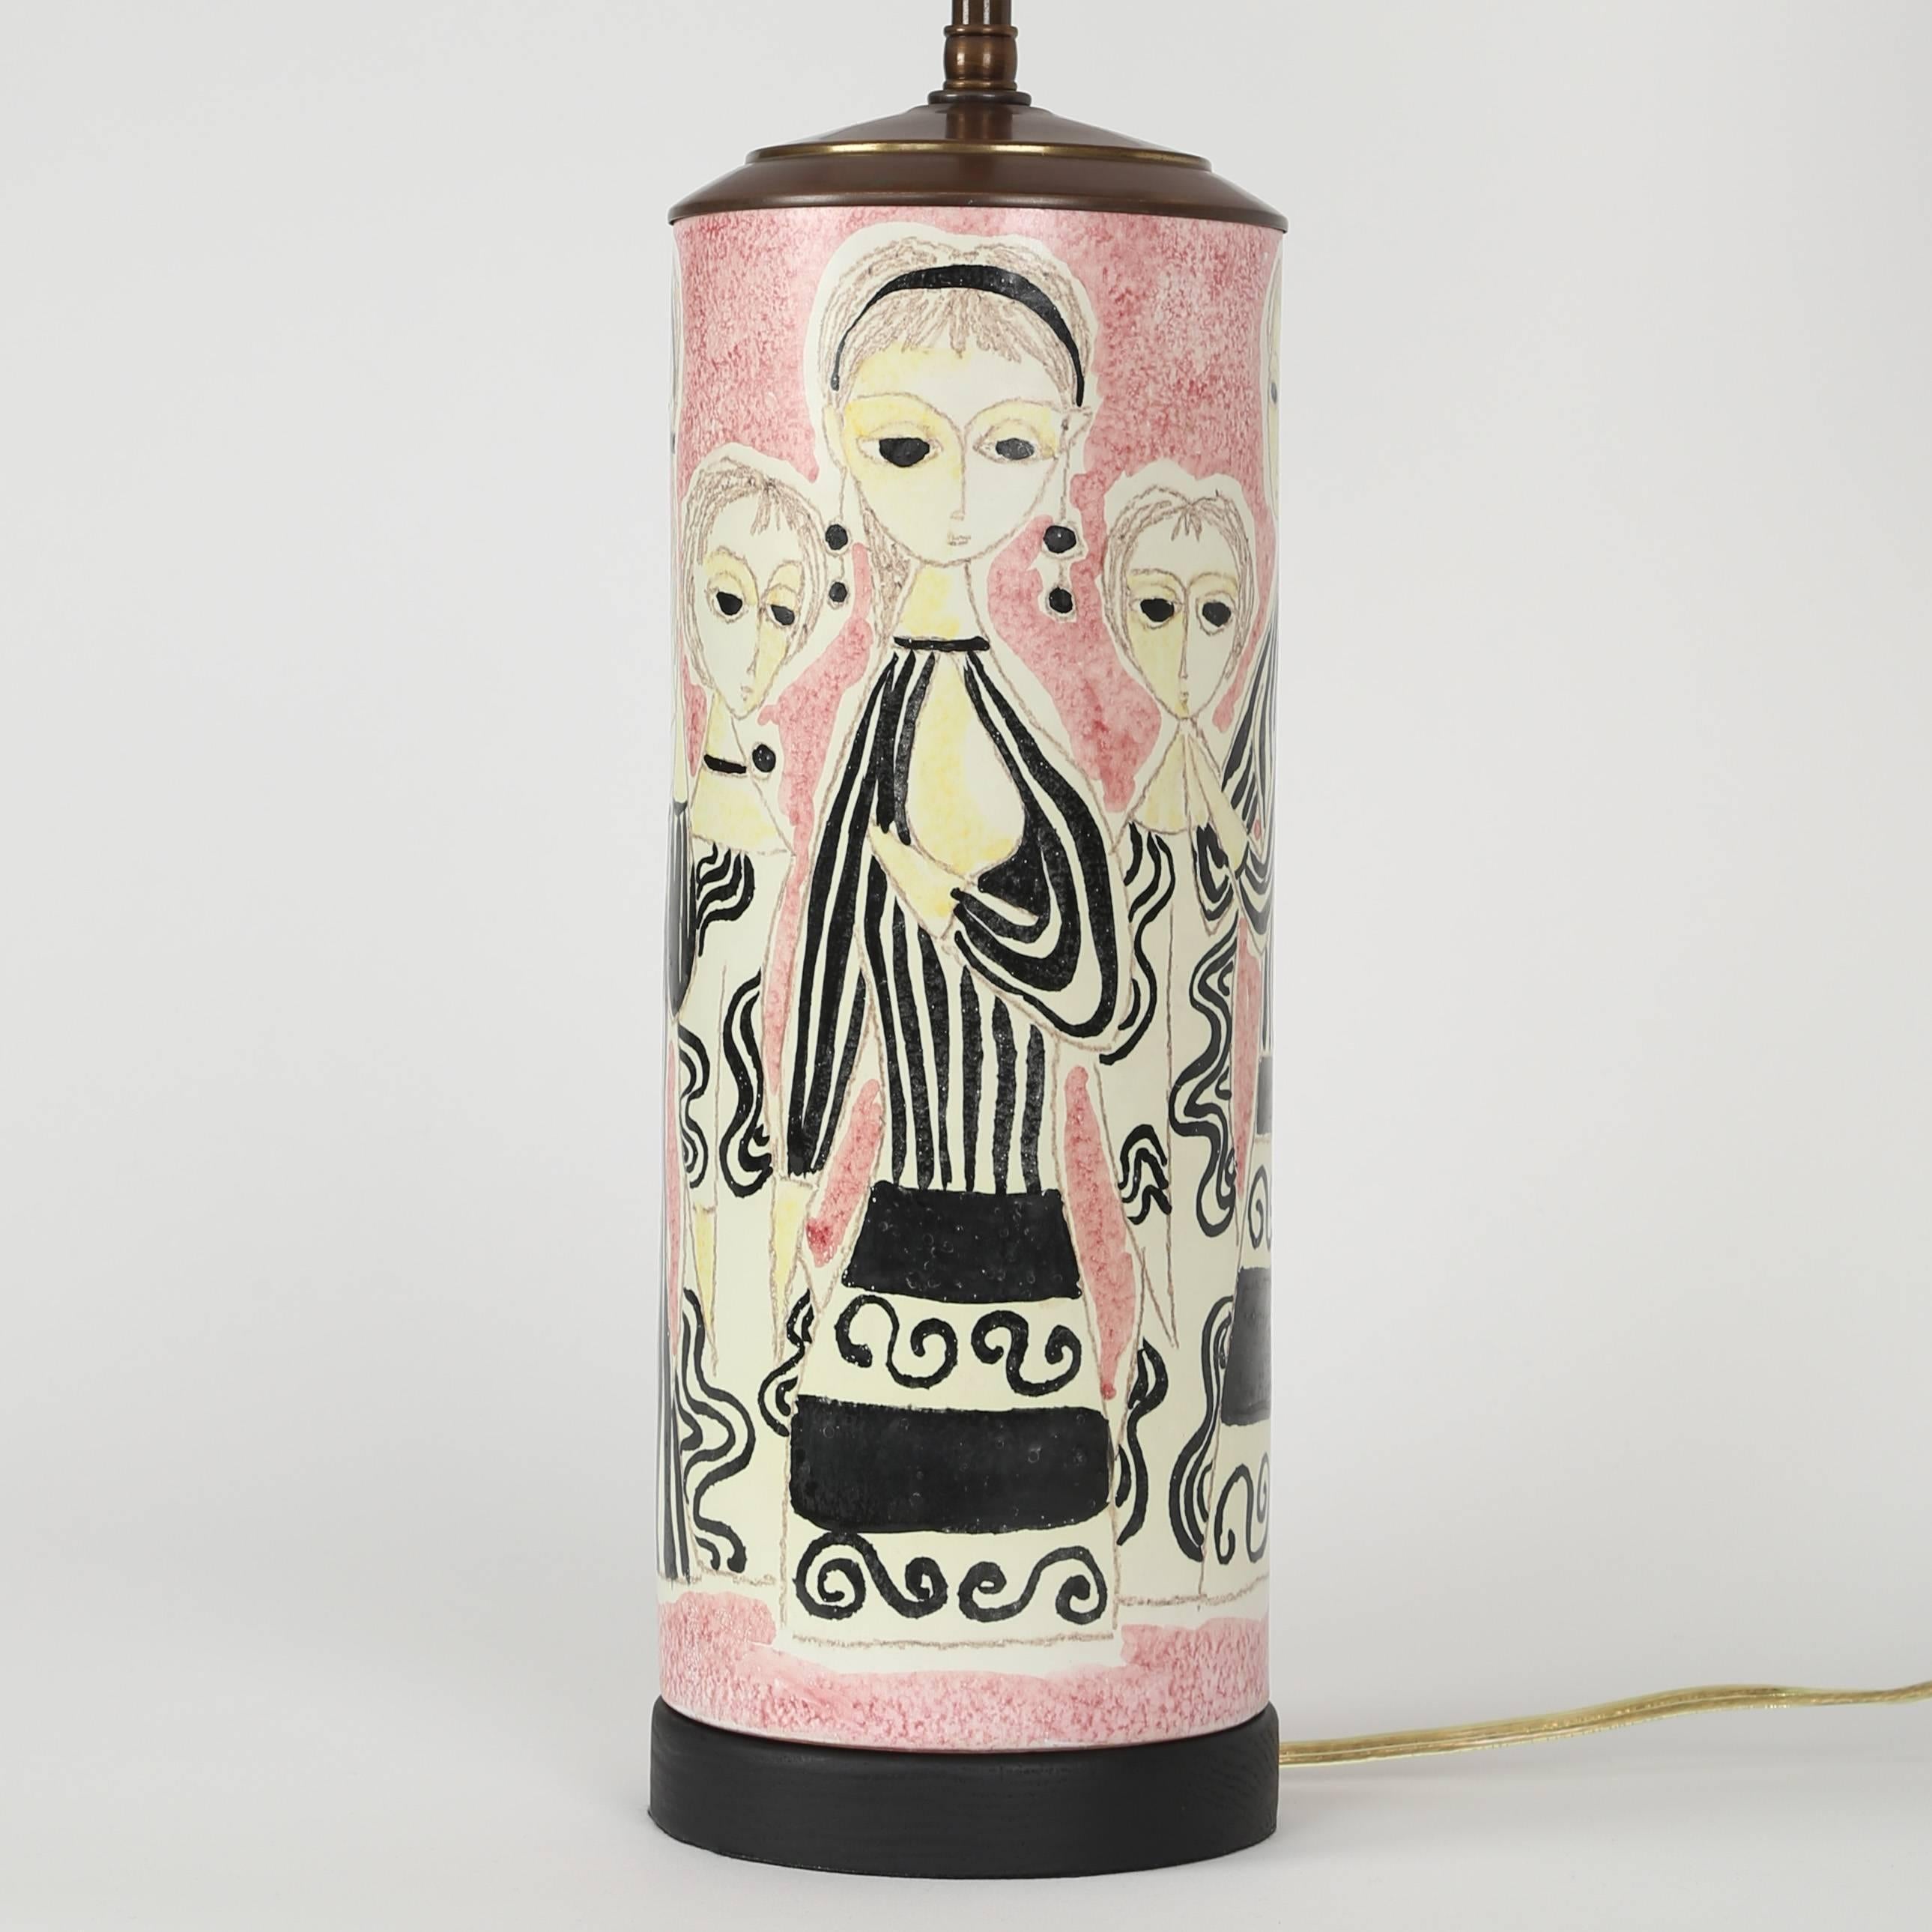 This charming ceramic table lamp features women in mod black-and-white cocktail dresses against a pink background. New antique-brass hardware features double standard-base sockets with pull chains and new wiring. Remains of signature on bottom of